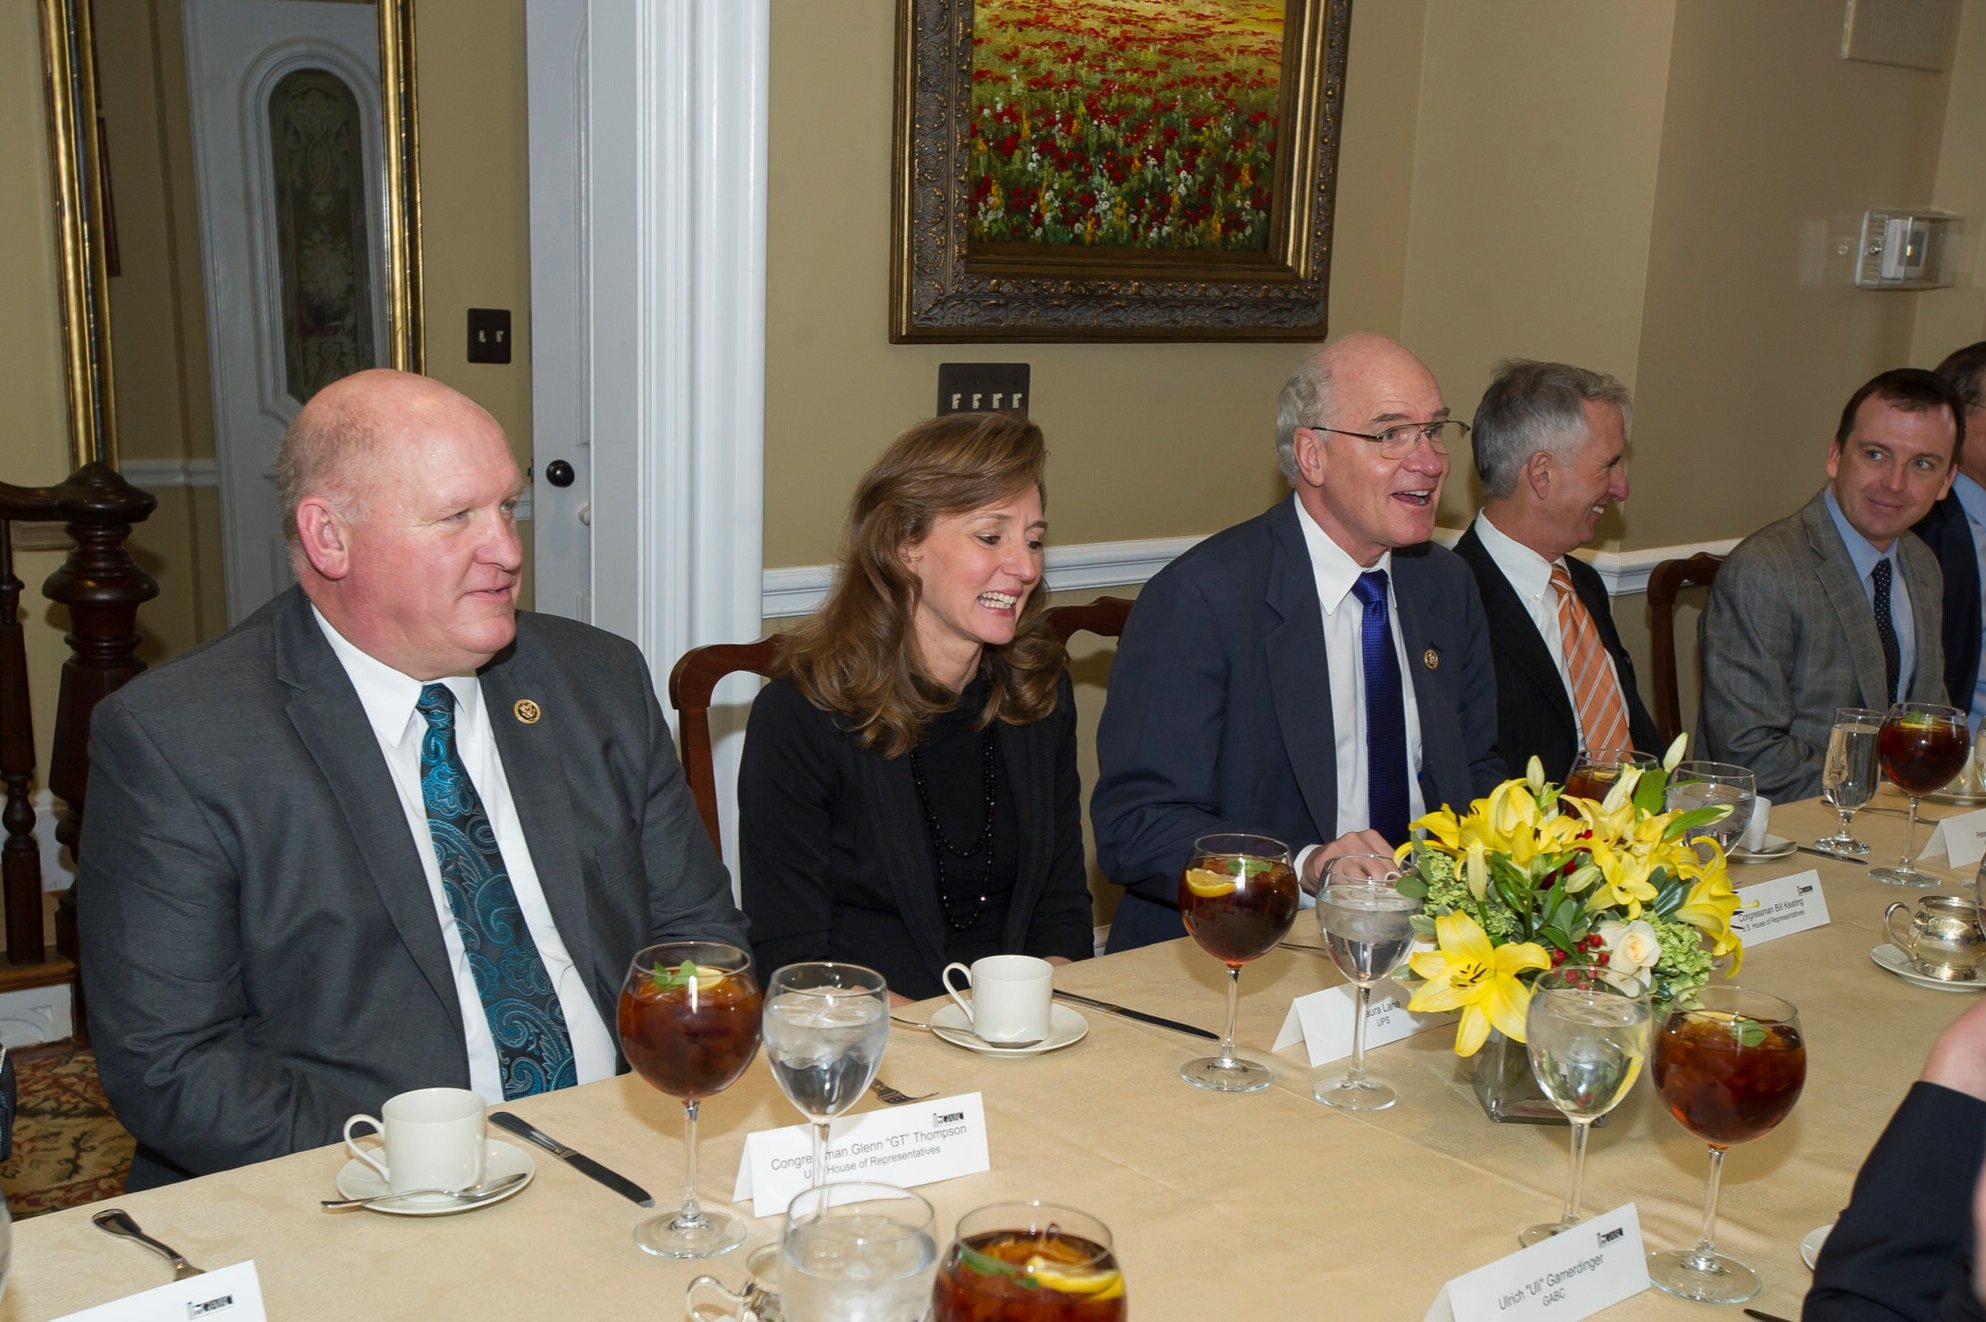  Rep. ‘GT’ Thompson (PA-15), Laura Lane (UPS), and Rep. Bill Keating (MA-09) at a GABC Roundtable Discussion 